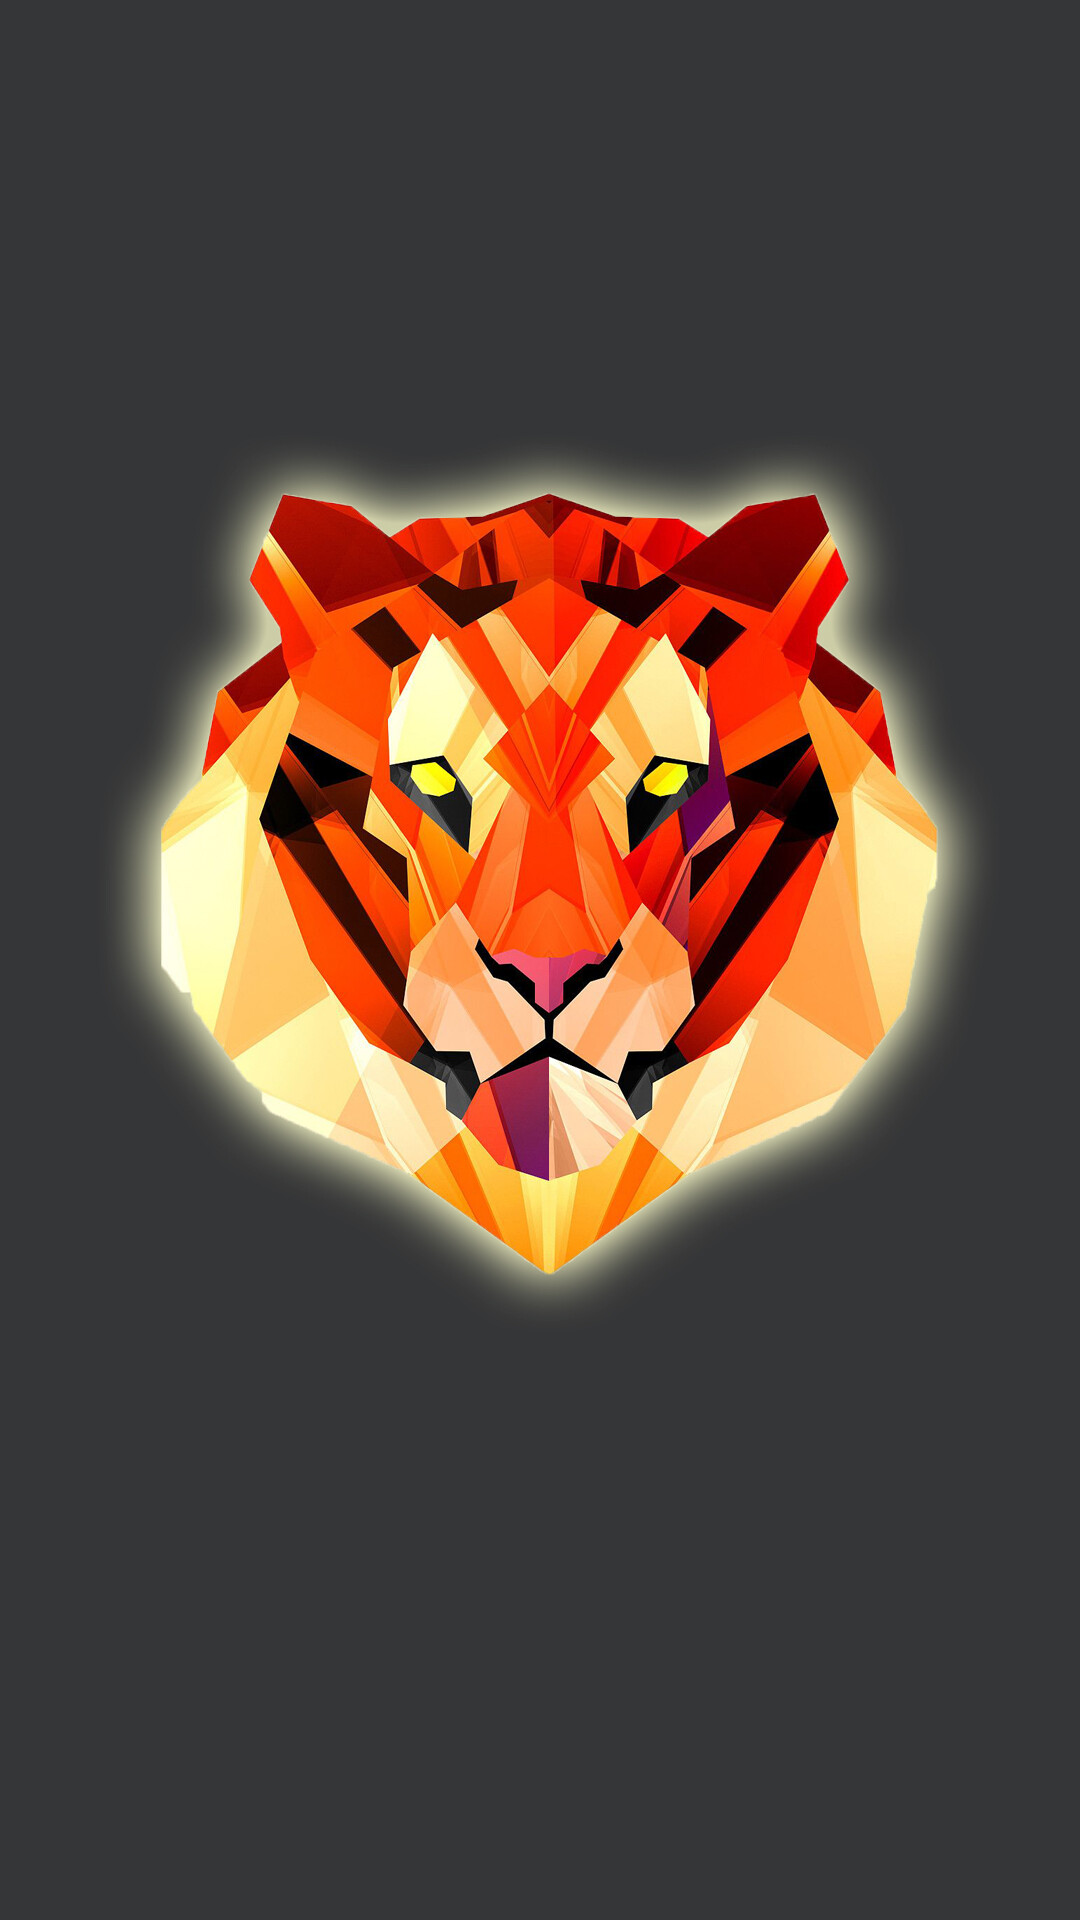 Geometric Animal: Tiger face created with lines, triangles, and rectangles in primary colors. 1080x1920 Full HD Background.